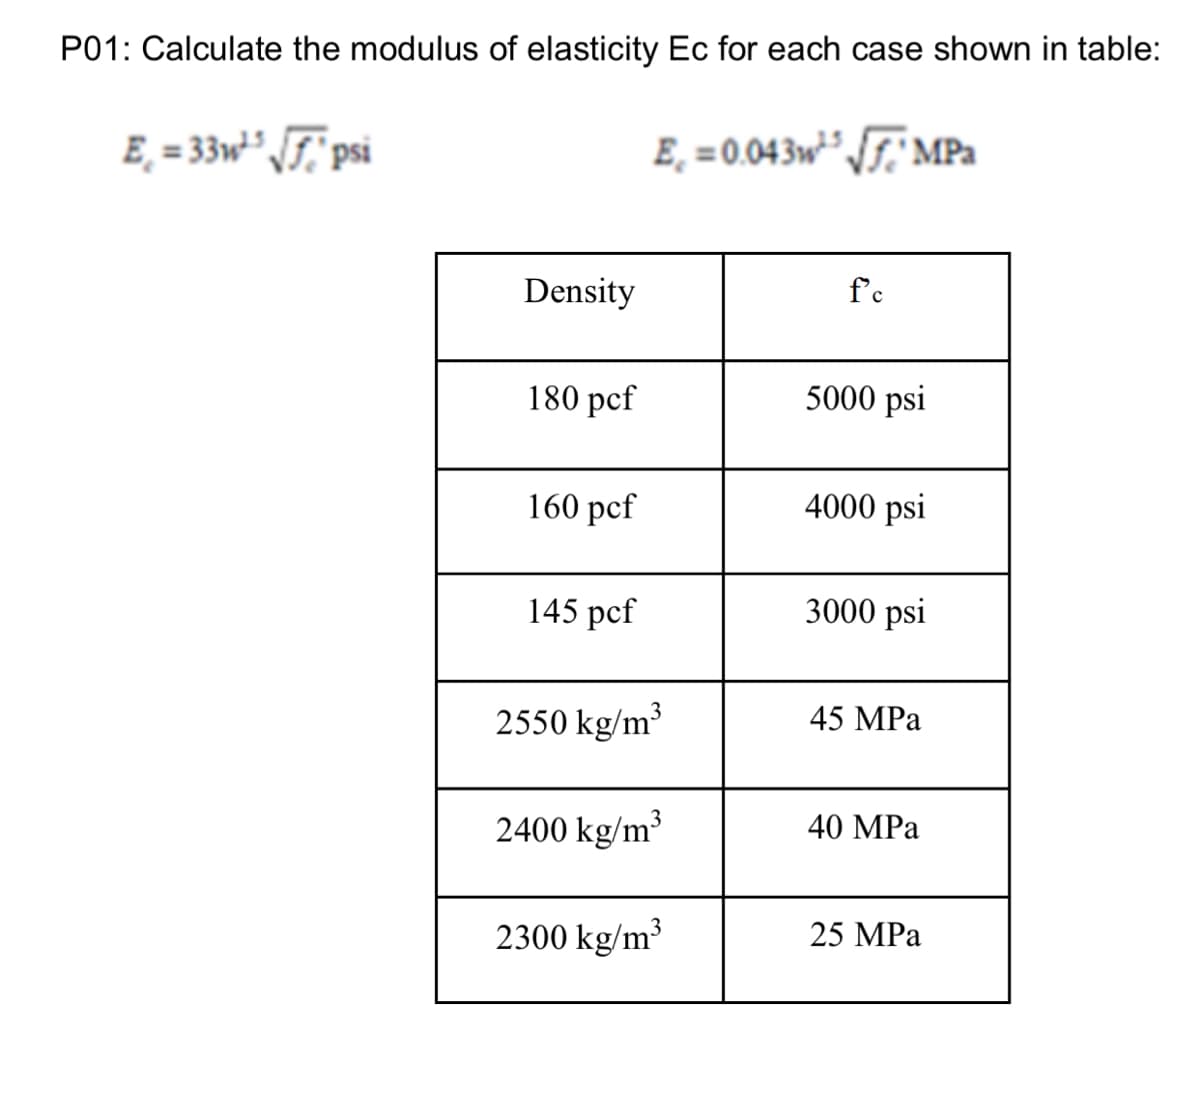 P01: Calculate the modulus of elasticity Ec for each case shown in table:
E₁=33w²5 √√, psi
Density
180 pcf
160 pcf
145 pcf
E,=0.043w¹ √√ MPa
2550 kg/m³
2400 kg/m³
2300 kg/m³
f'c
5000 psi
4000 psi
3000 psi
45 MPa
40 MPa
25 MPa